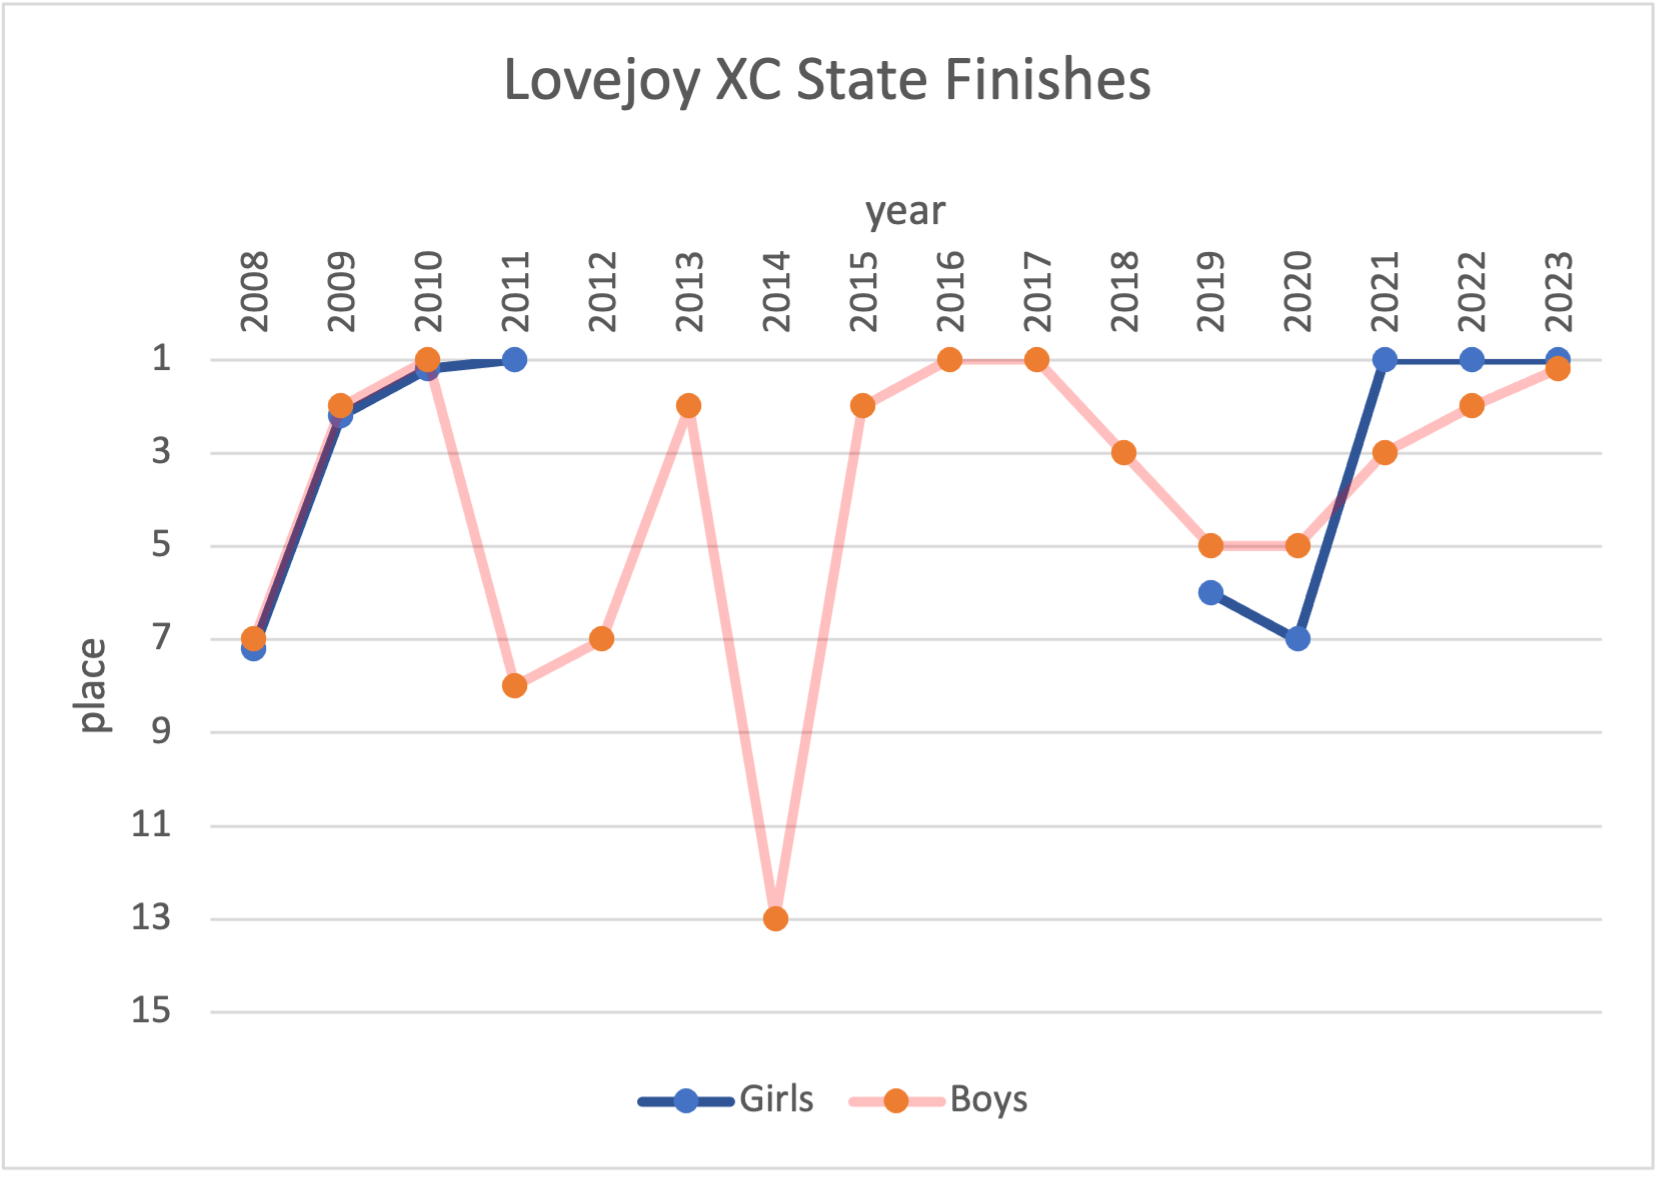 Lovejoy's State finishes